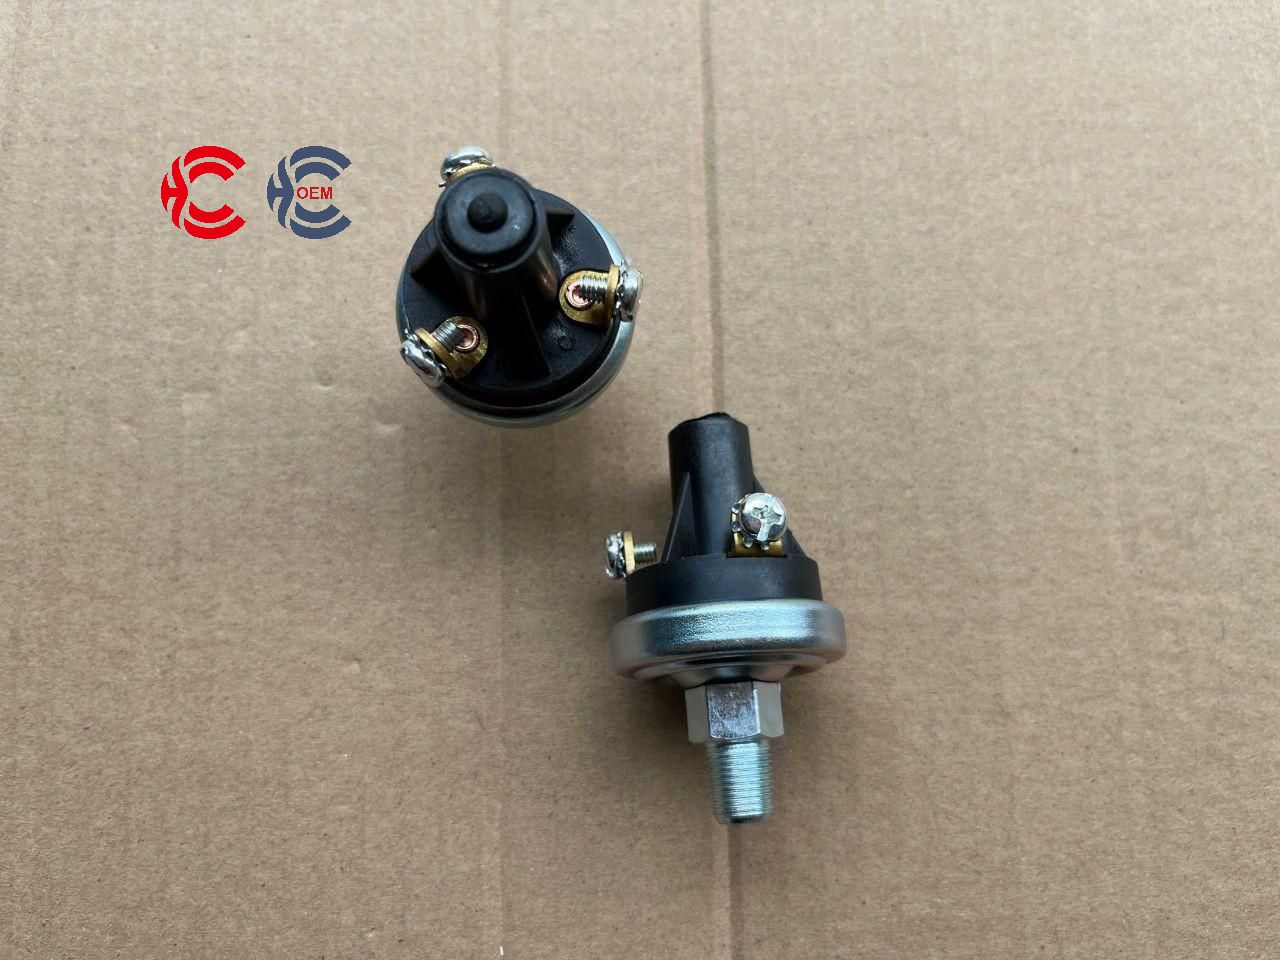 OEM: 2848A013Material: ABS MetalColor: GoldenOrigin: Made in ChinaWeight: 100gPacking List: 1* Pressure Sensor More ServiceWe can provide OEM Manufacturing serviceWe can Be your one-step solution for Auto PartsWe can provide technical scheme for you Feel Free to Contact Us, We will get back to you as soon as possible.